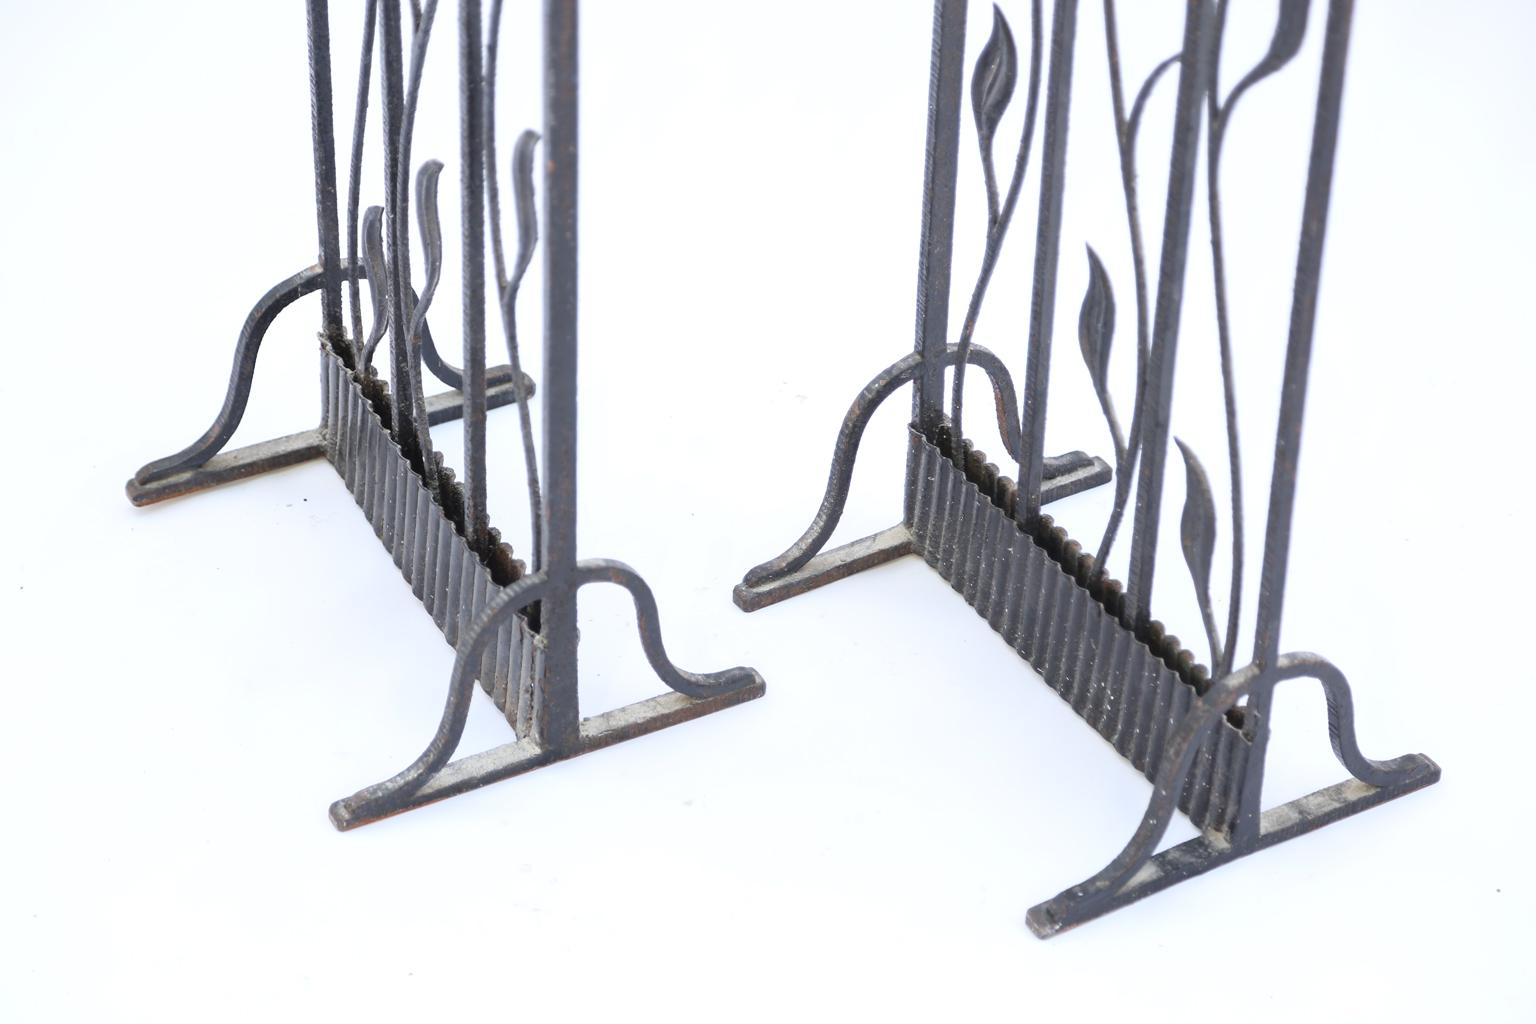 Pair of Art Deco gates, now a screen or room divider, of wrought iron, each side having a scalloped arch, inset with scrolling foliate vines.

Stock id: D1841.